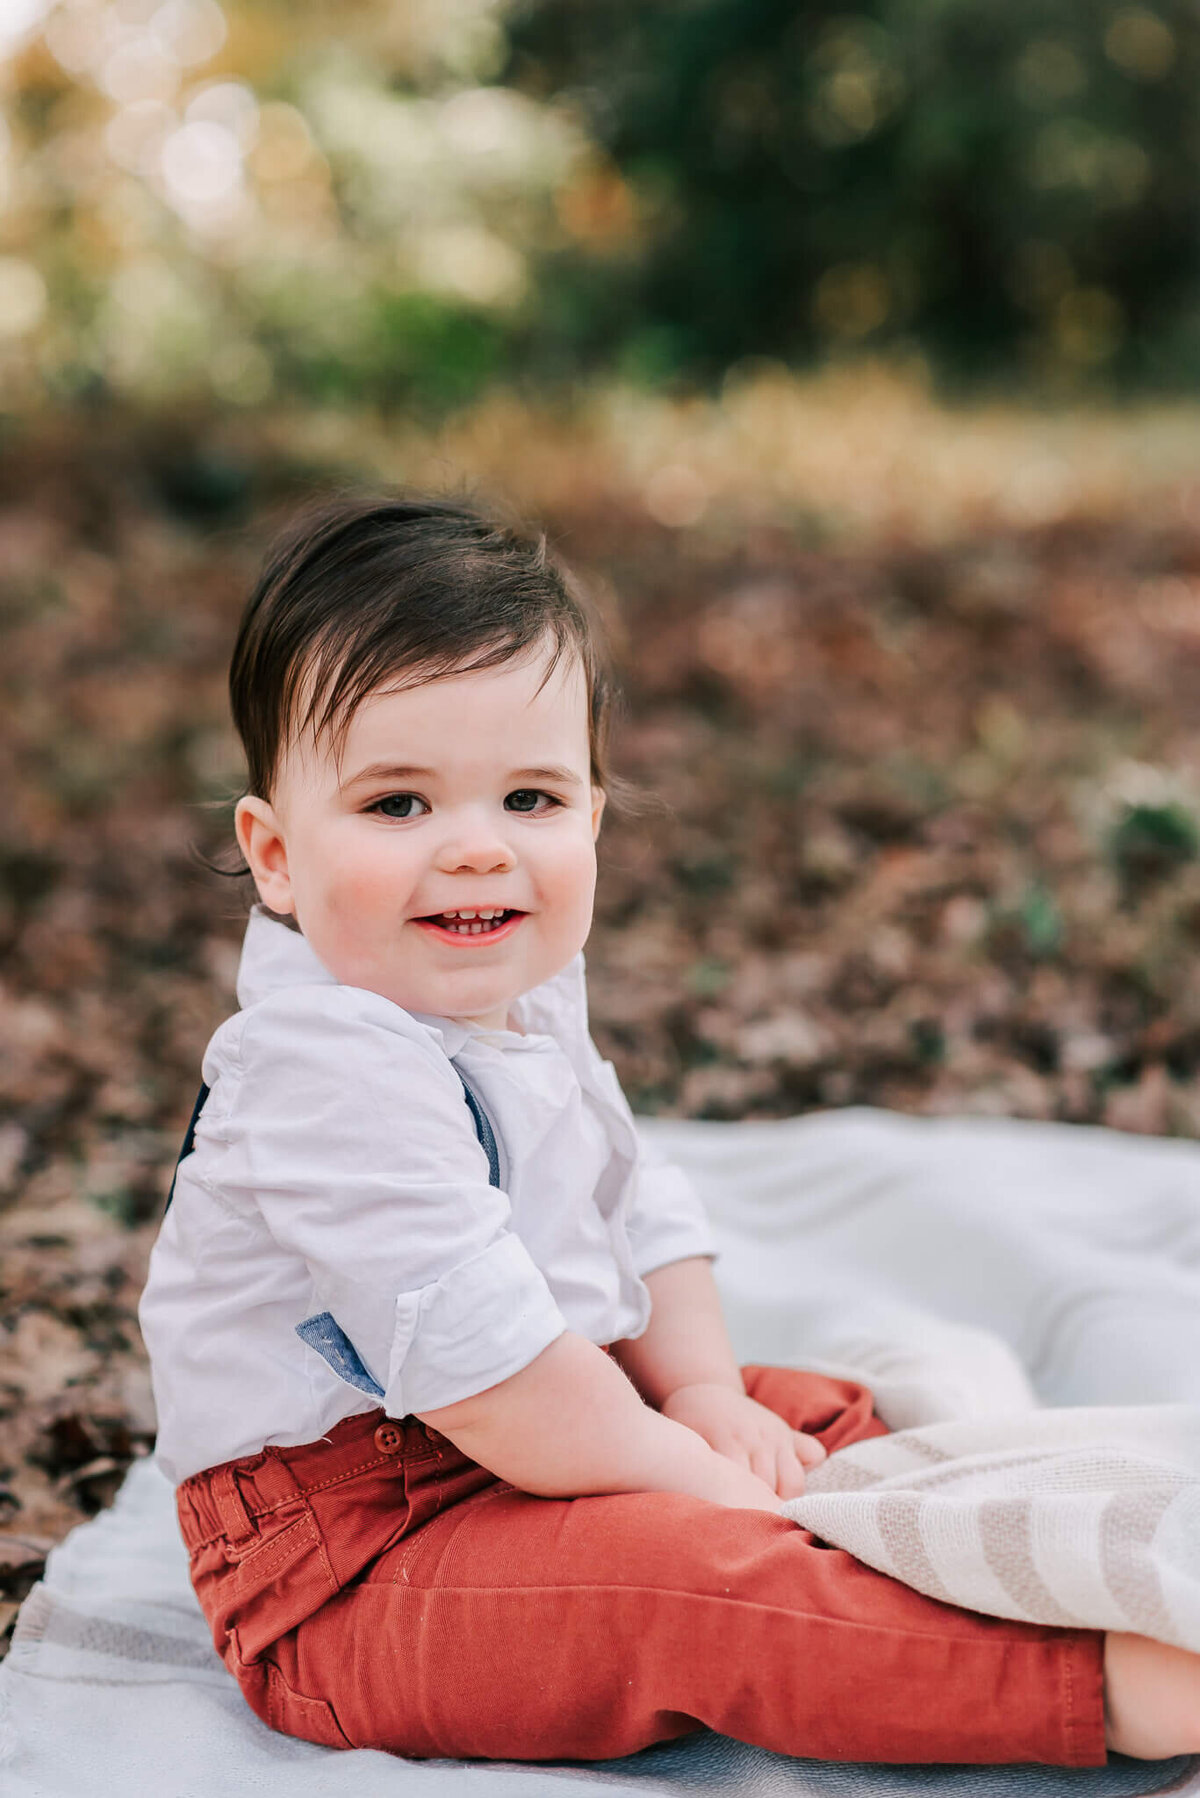 A smiling boy sitting on and playing with a white blanket in Lake Fairfax Park